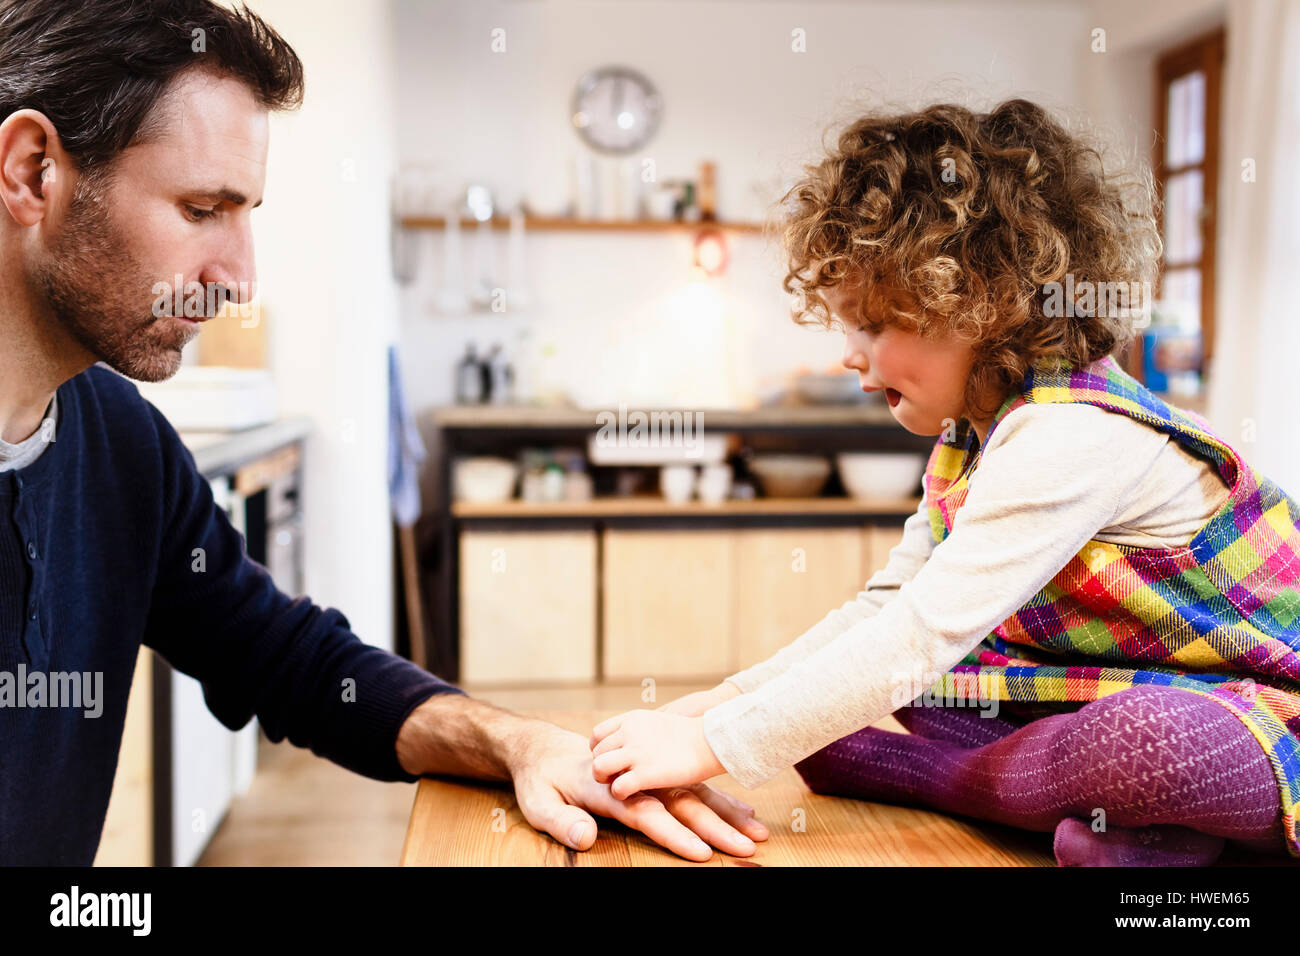 Girl on table sticking adhesive plaster onto father's hand Stock Photo